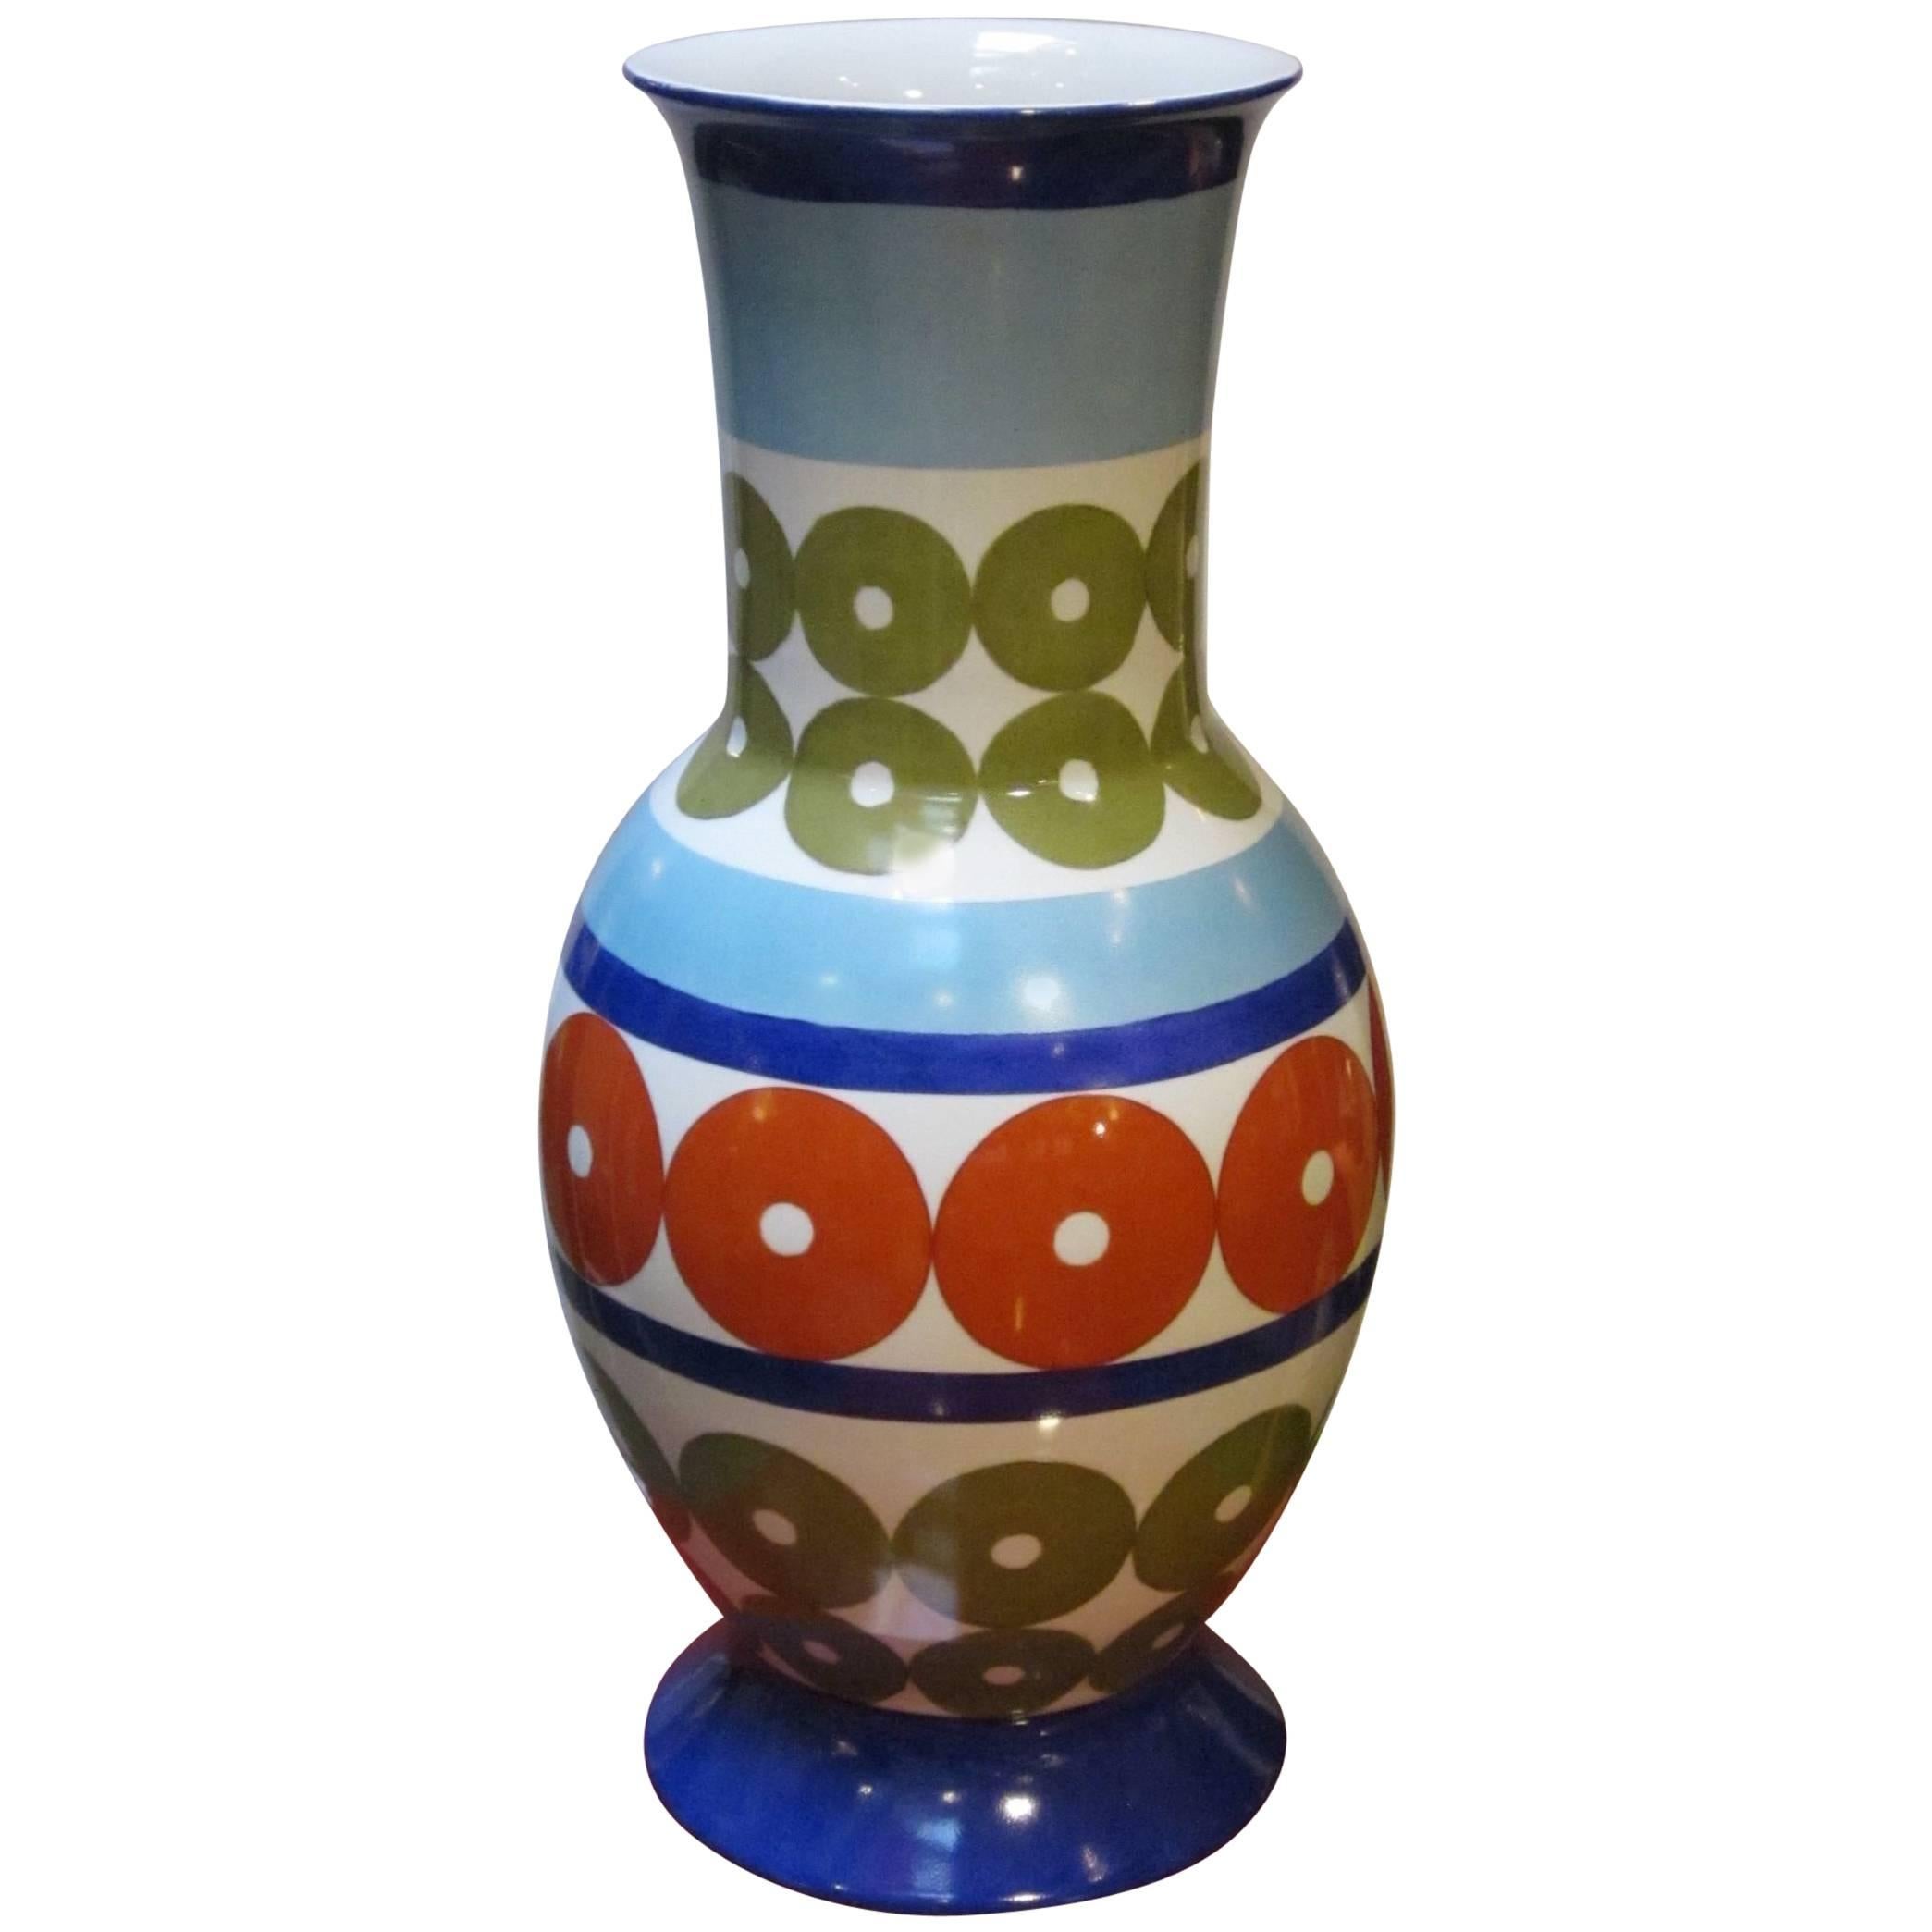 Bright Patterned Blue, White, Olive and Red Porcelain Vase by Frederic De Luca